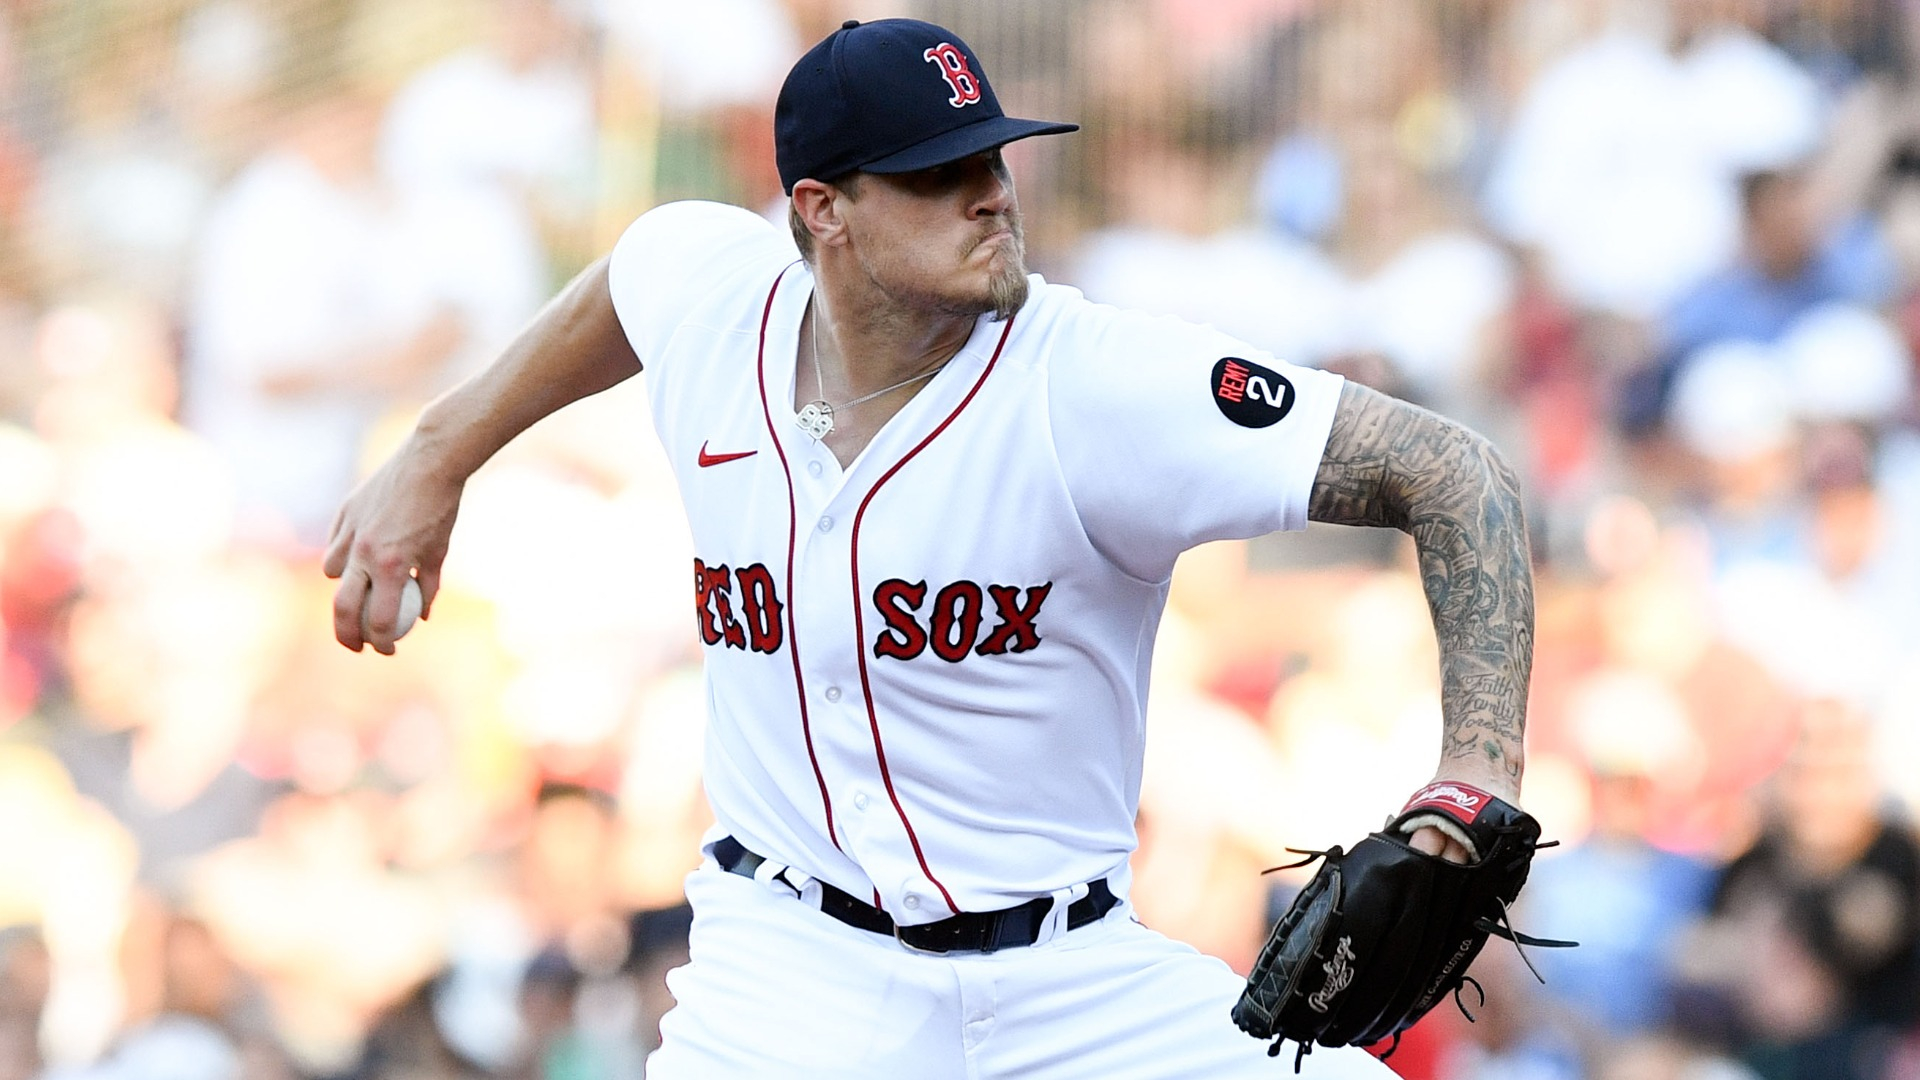 Tanner Houck Injury Update: Red Sox pitcher hit in face to have